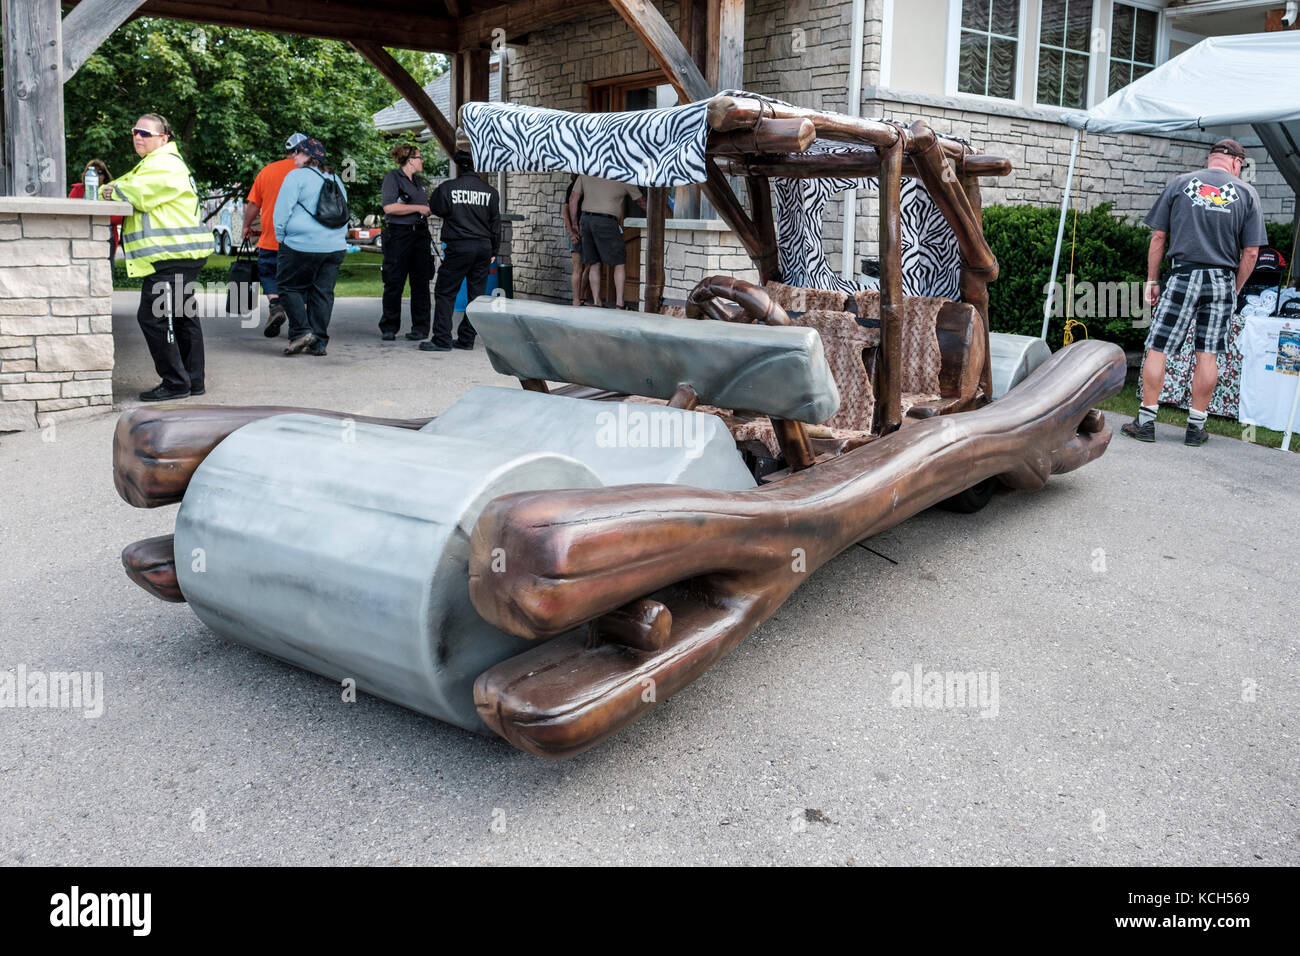 A real life replica of the Flintstones car in exhibition at Fleetwood Country Cruize-In car show, Plunkett Estate, London, Ontario, Canada Stock Photo